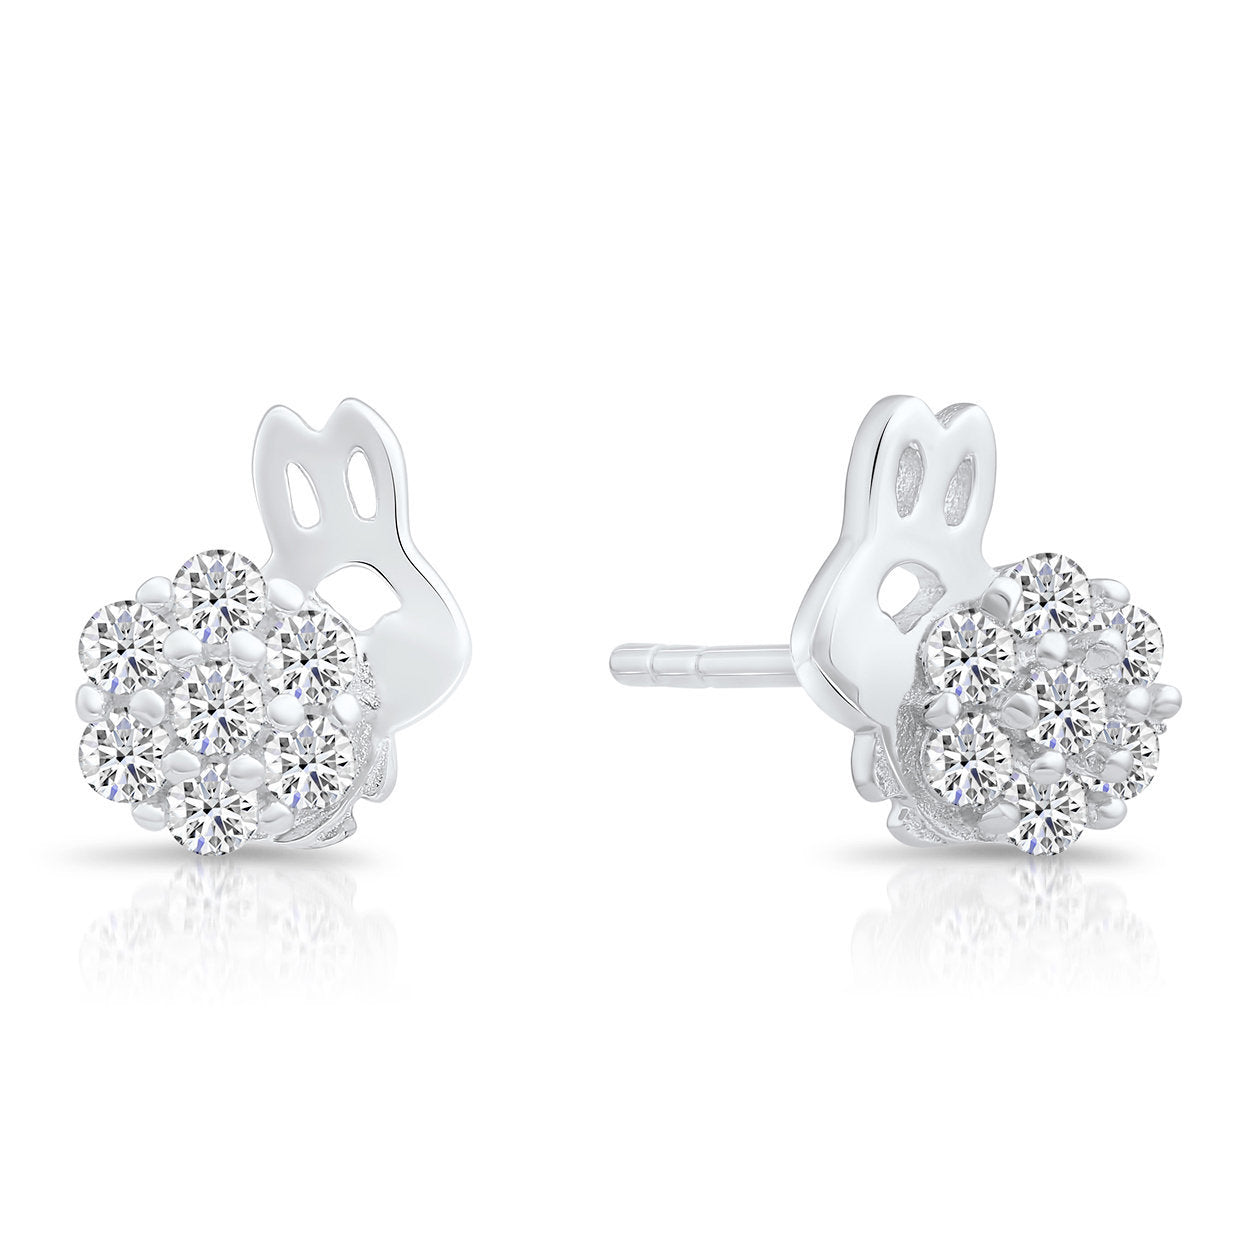 CZ Bunny Stud Earrings, Gold Plated in Sterling Silver